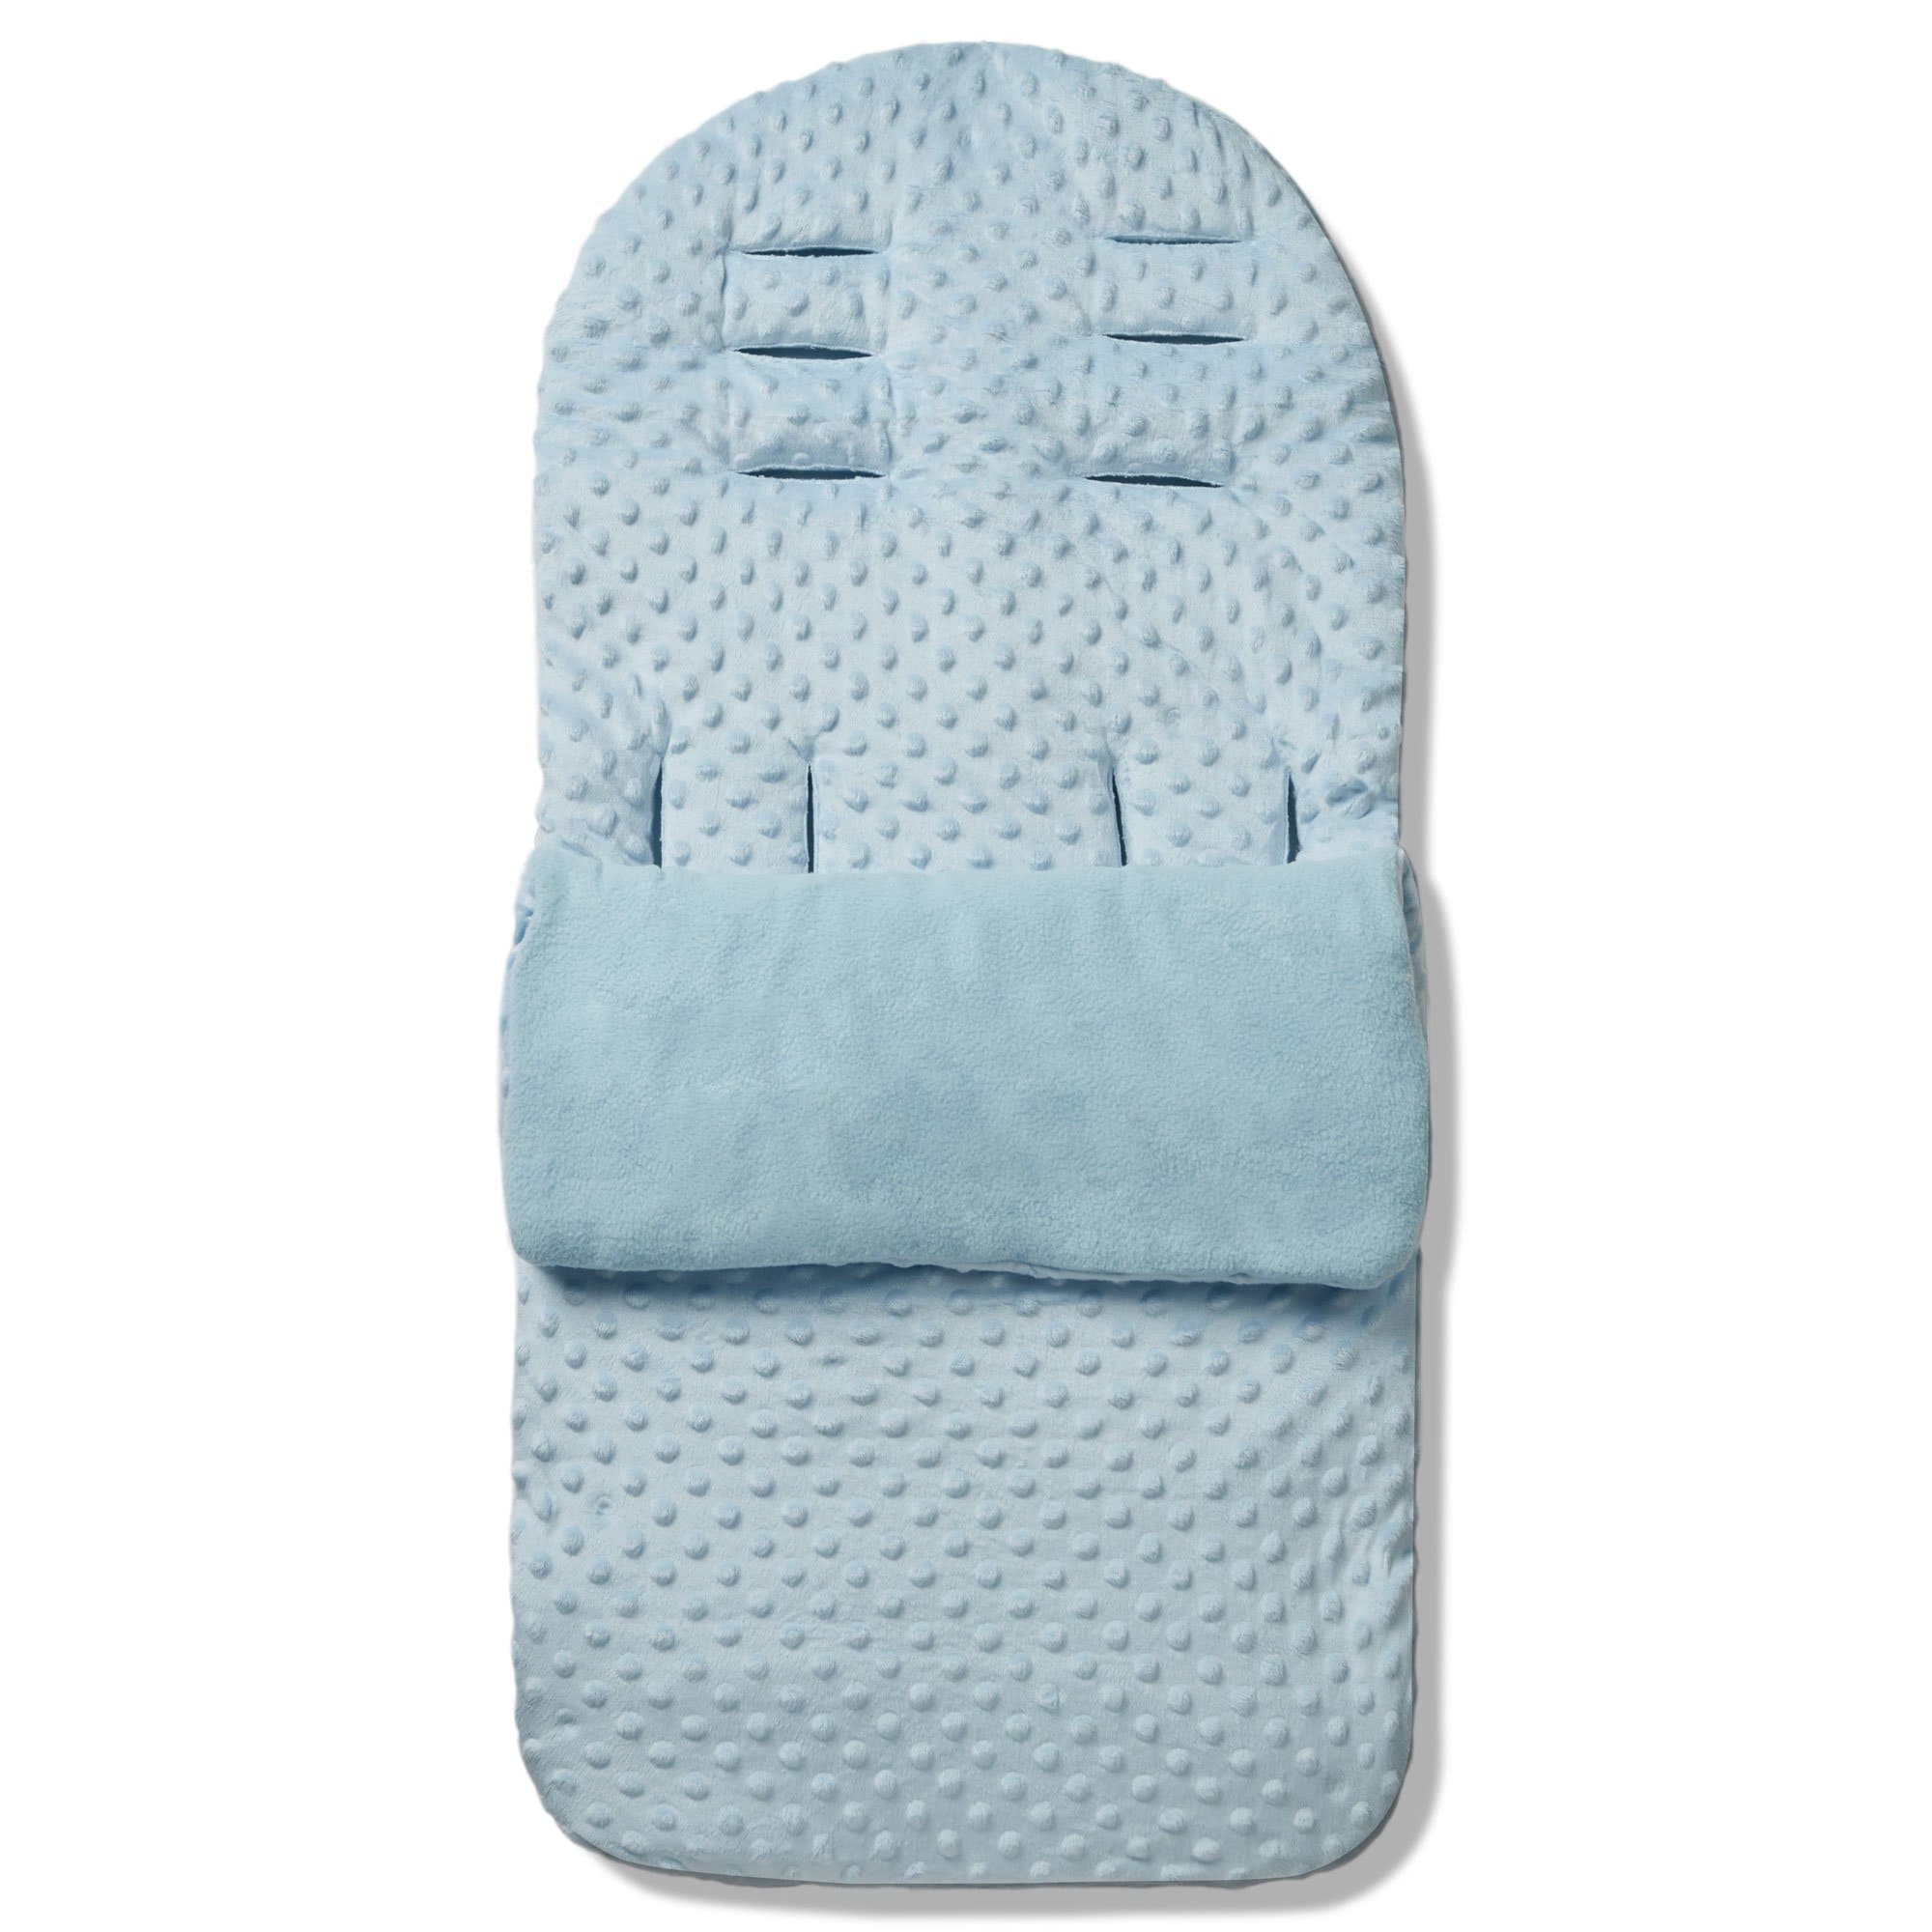 Dimple Footmuff / Cosy Toes Compatible with Hartan - Blue / Fits All Models | For Your Little One